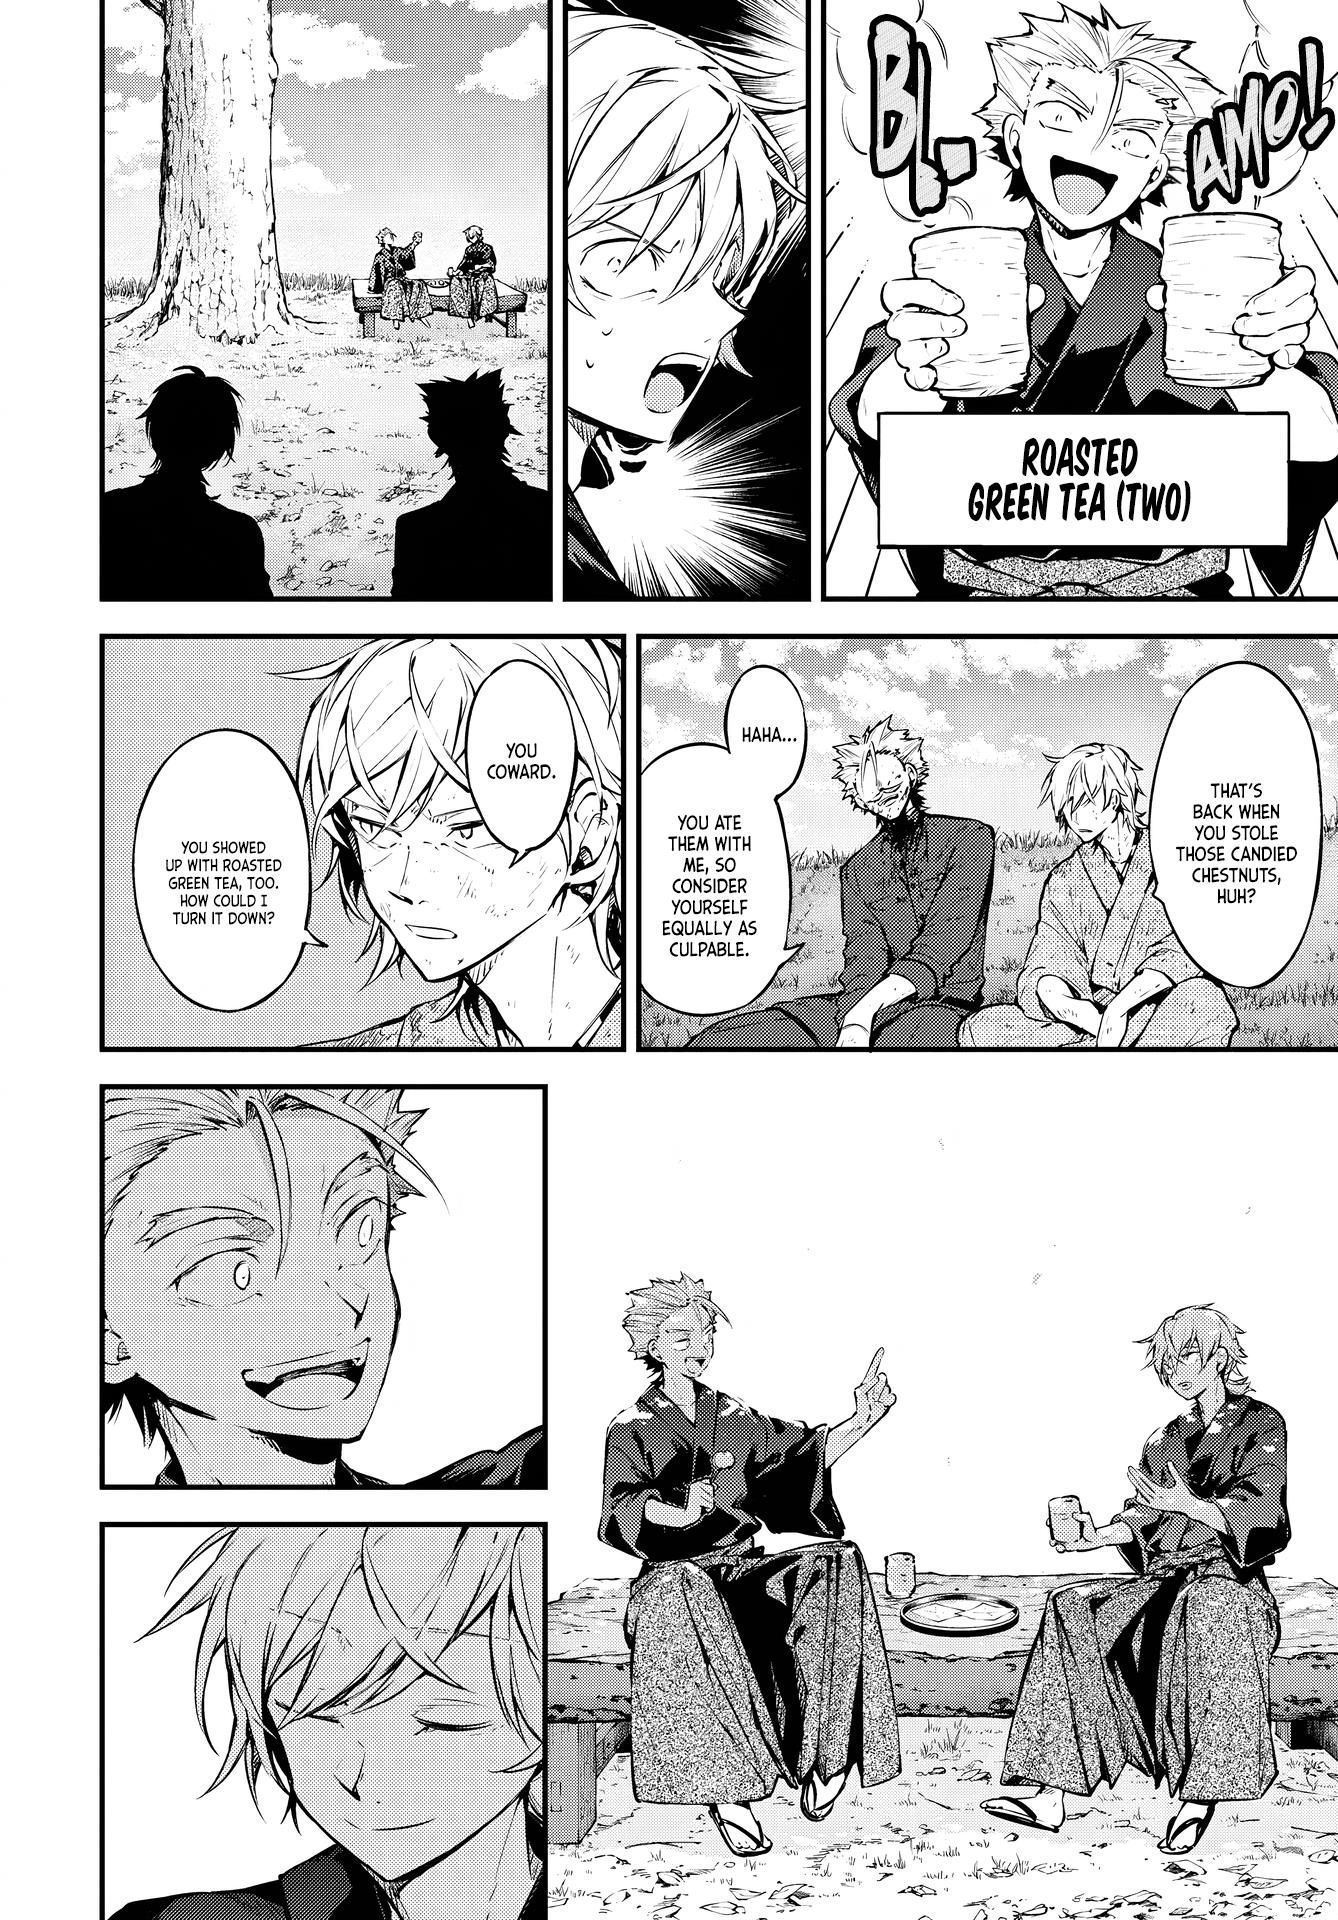 Bungo Stray Dogs chapter 112 page 23